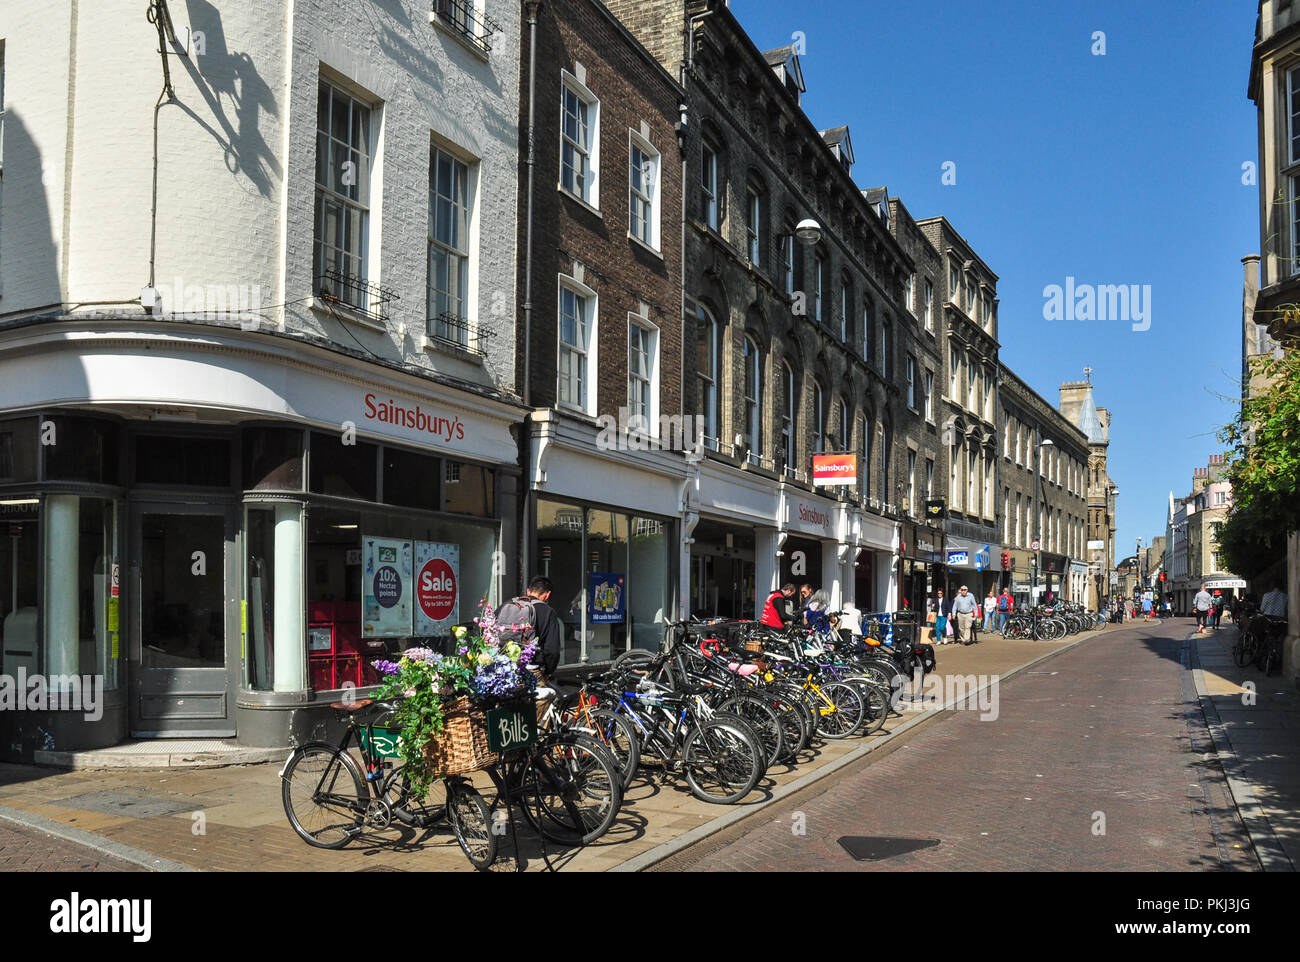 Bicycles, shops and offices, Sidney Street, Cambridge, England, UK Stock Photo